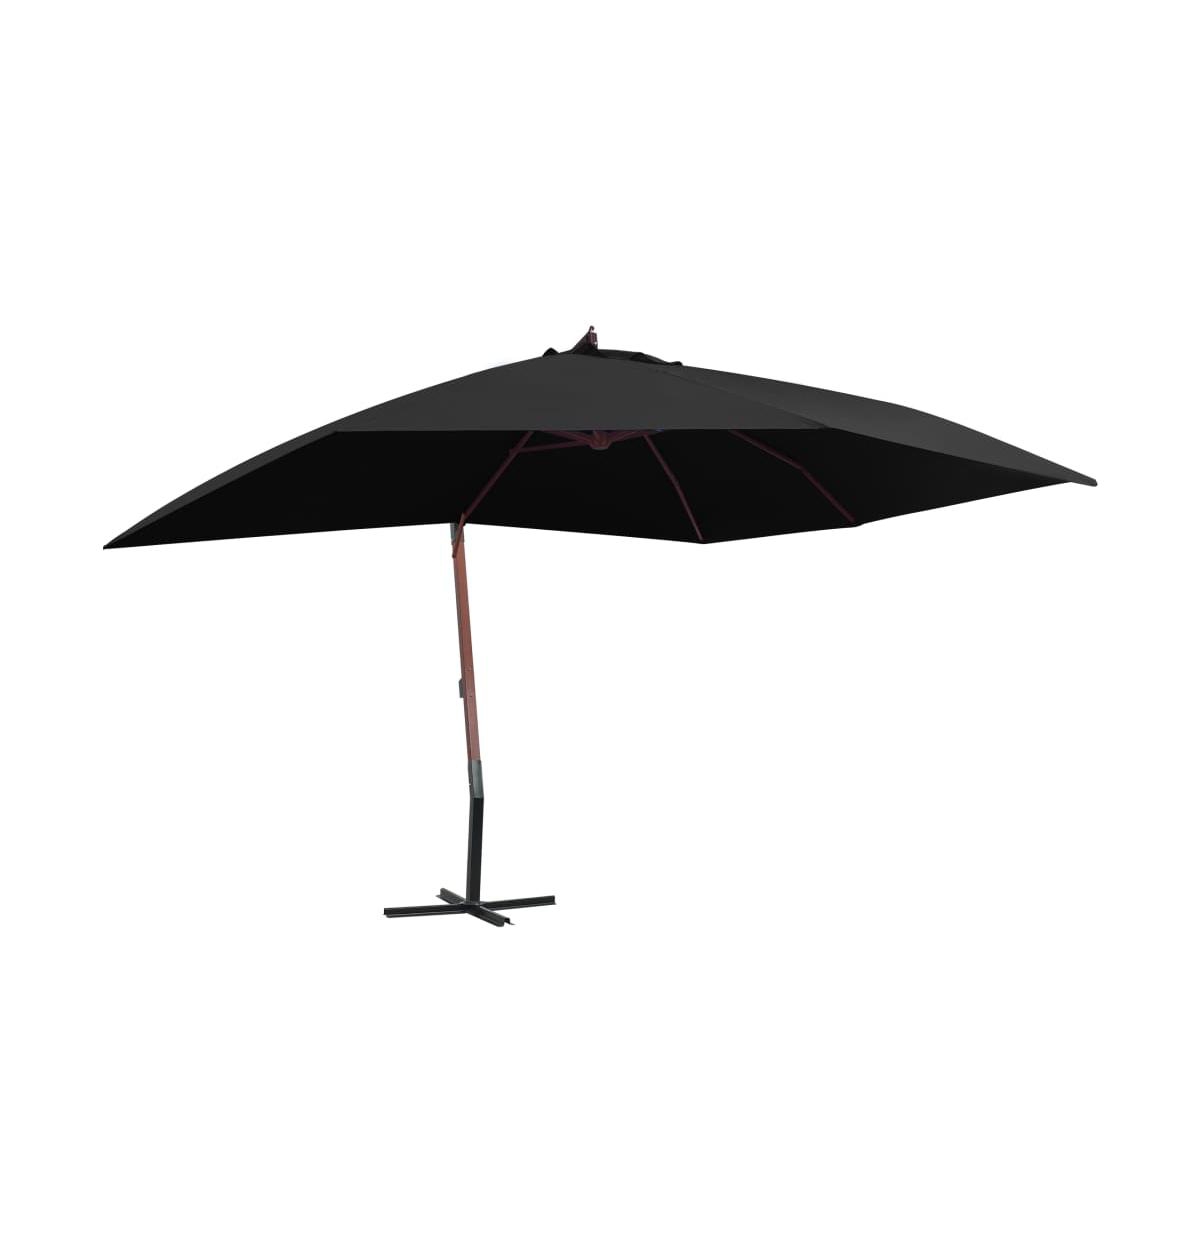 Hanging Parasol with Wooden Pole 157.5"x118.1" Black - Black